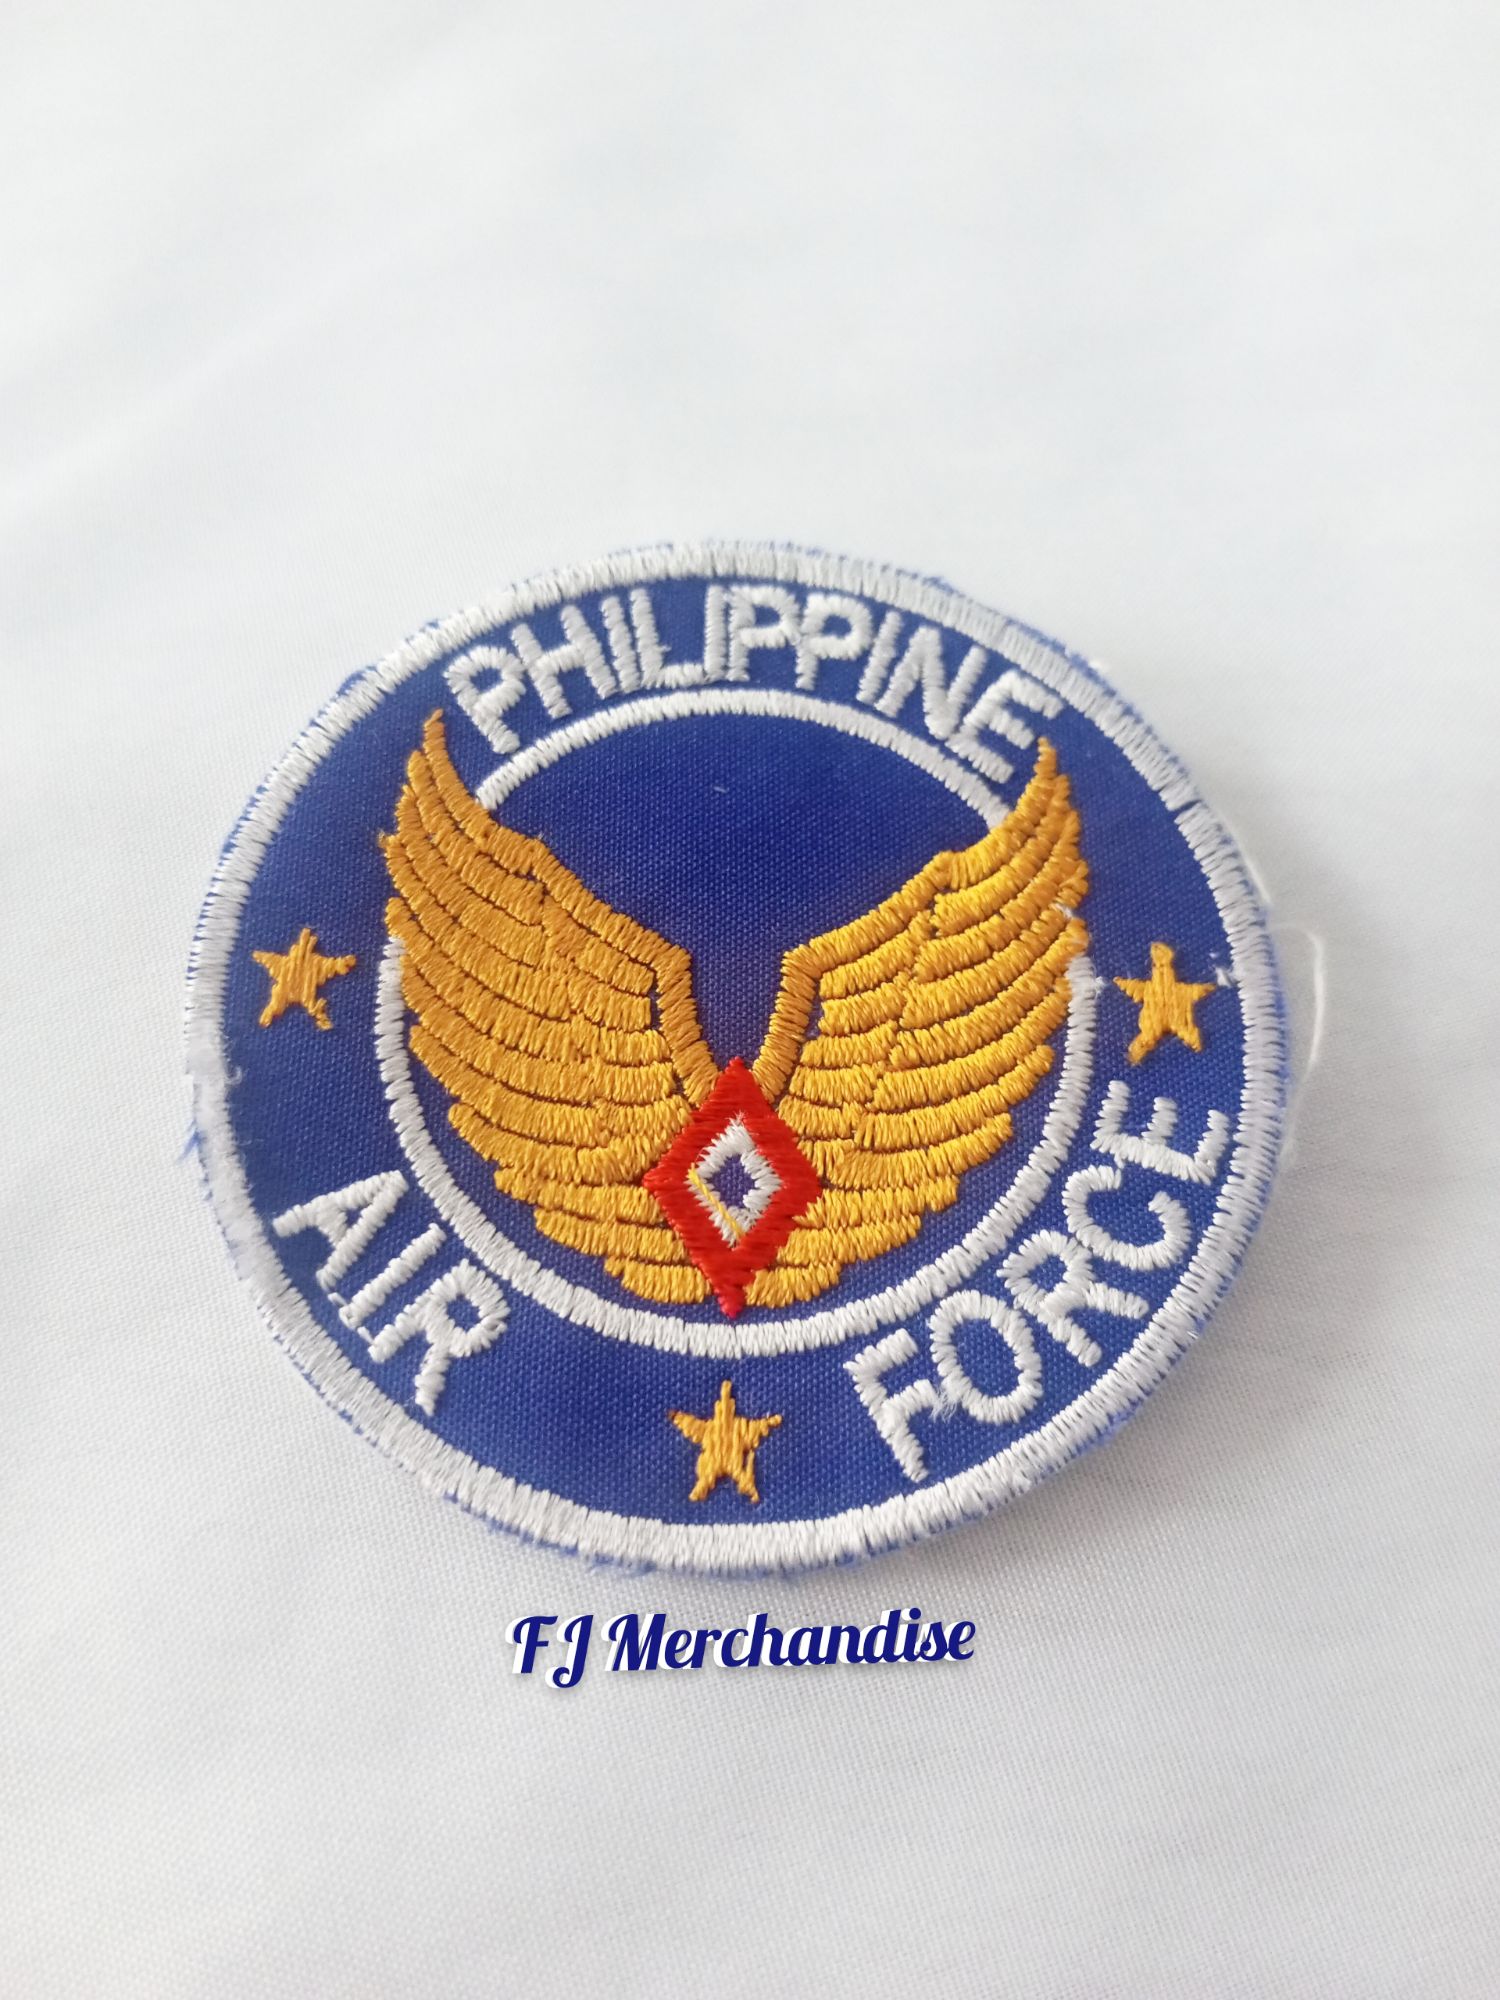 philippine air force seal